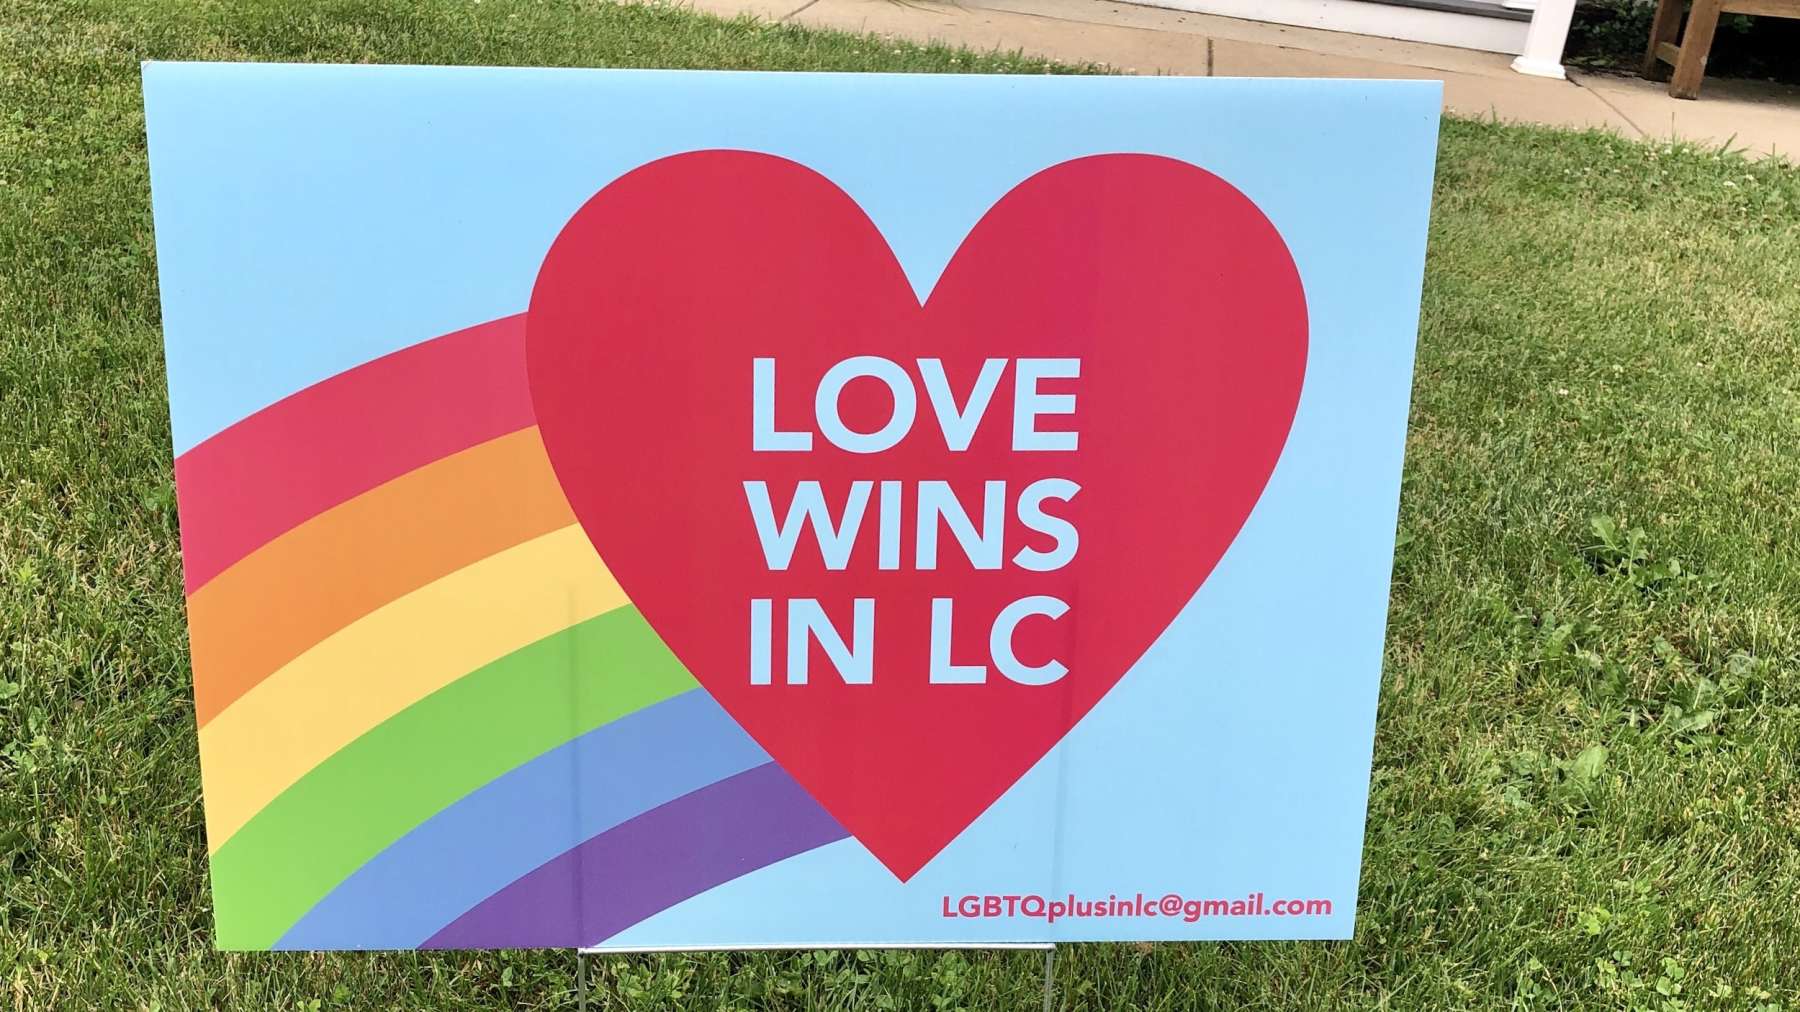 Rhode Island News: RI Queer PAC: Little Compton Town Council shows it’s conservative colors